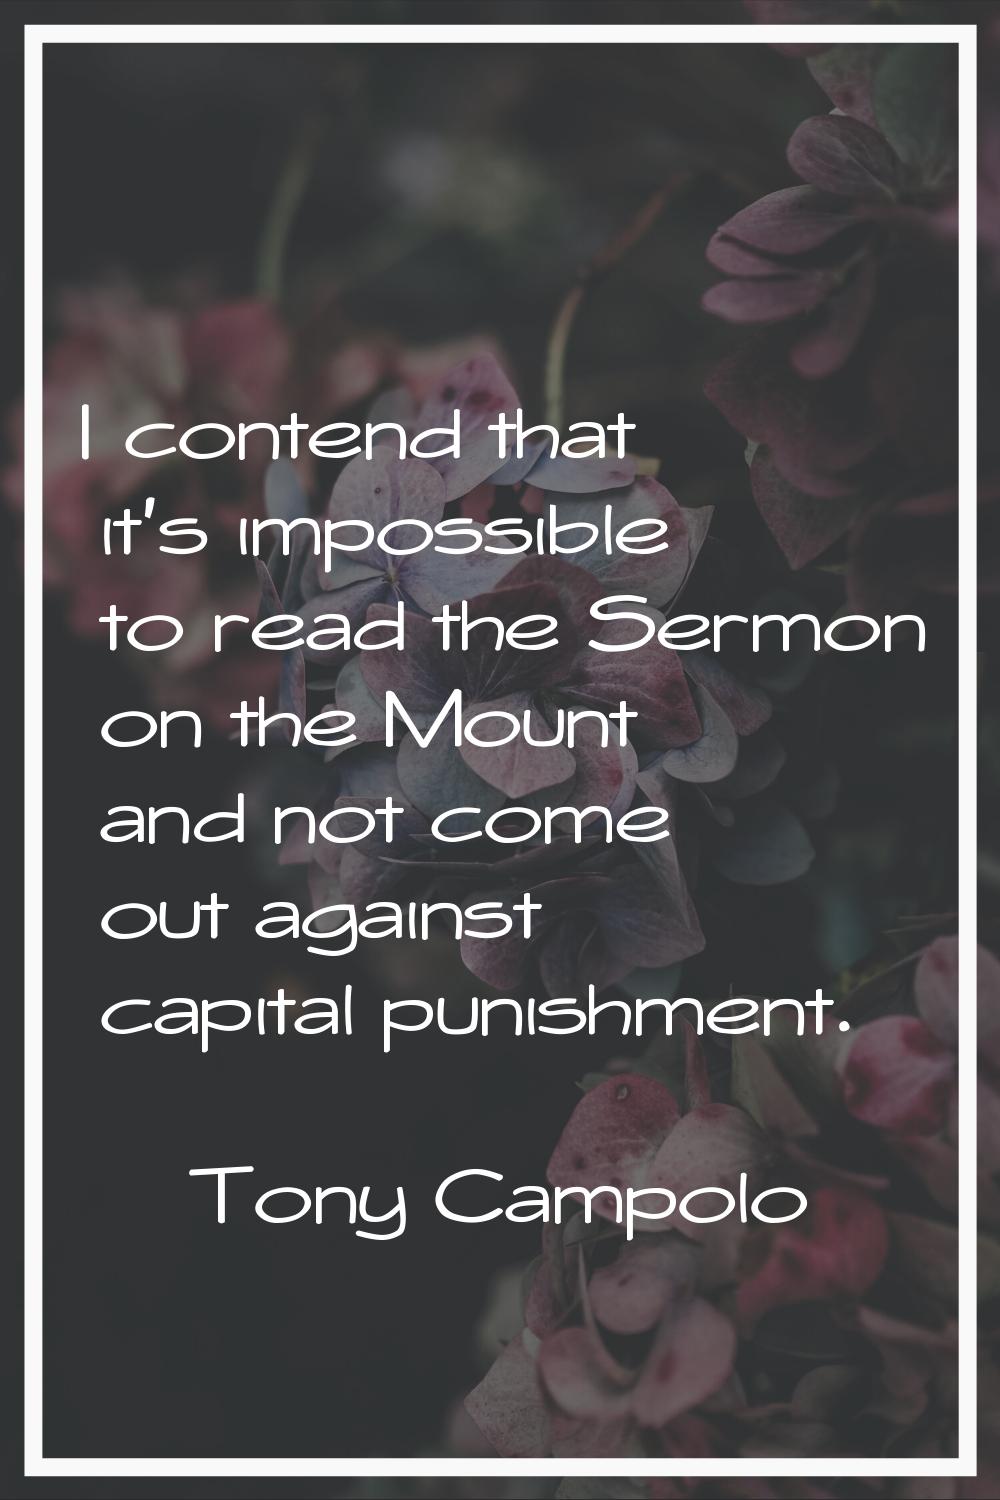 I contend that it's impossible to read the Sermon on the Mount and not come out against capital pun